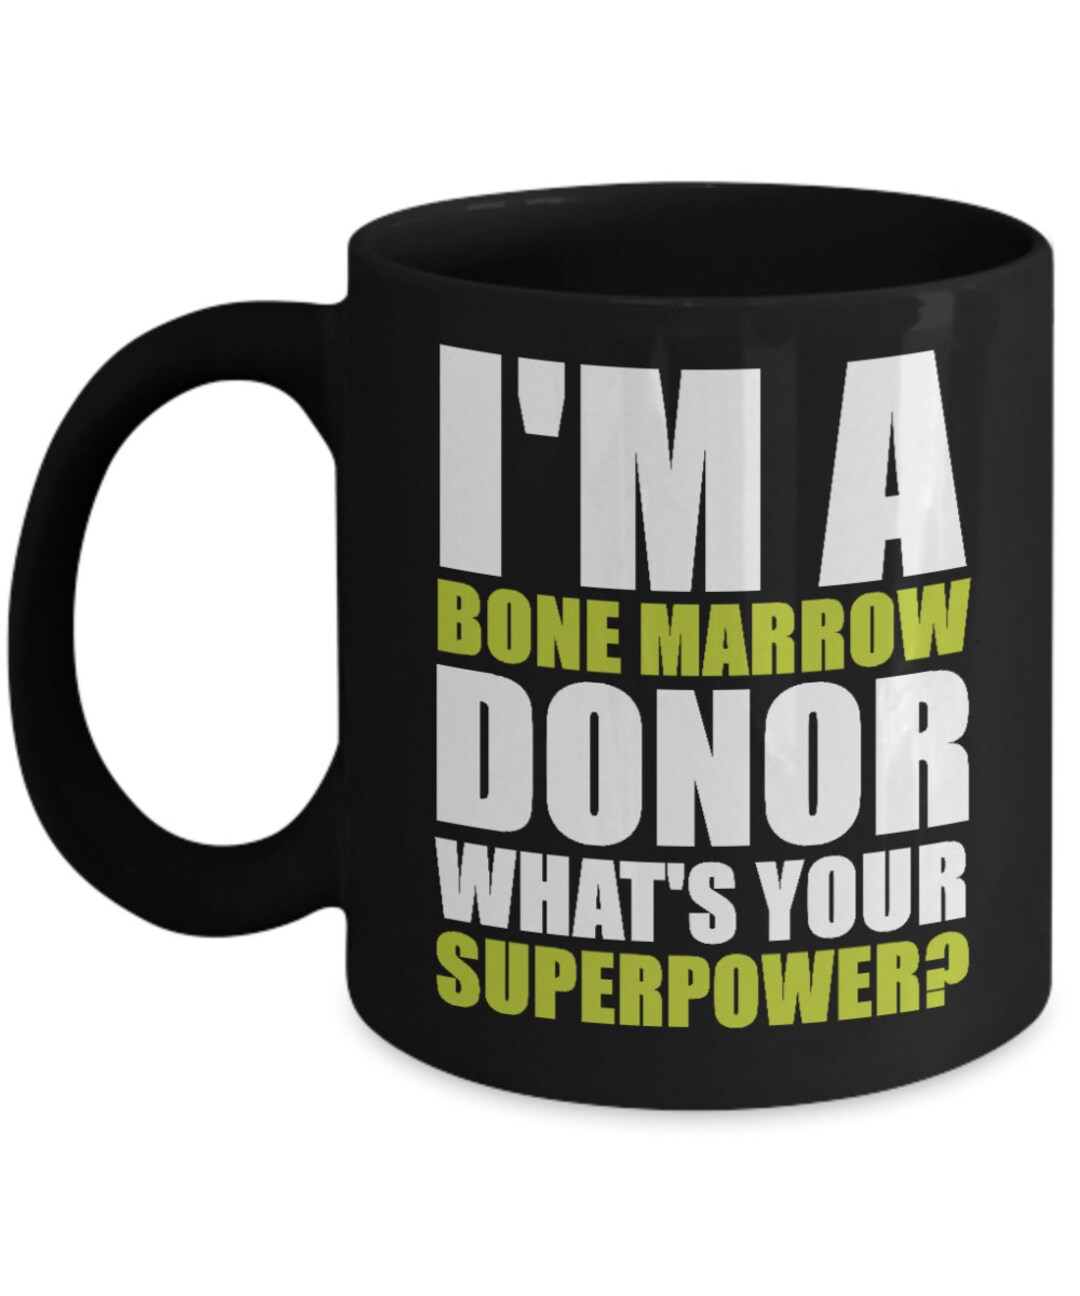 I'm A Bone Marrow Donor Mug What's Your Superpower Cool Gift Coffee Cup ...